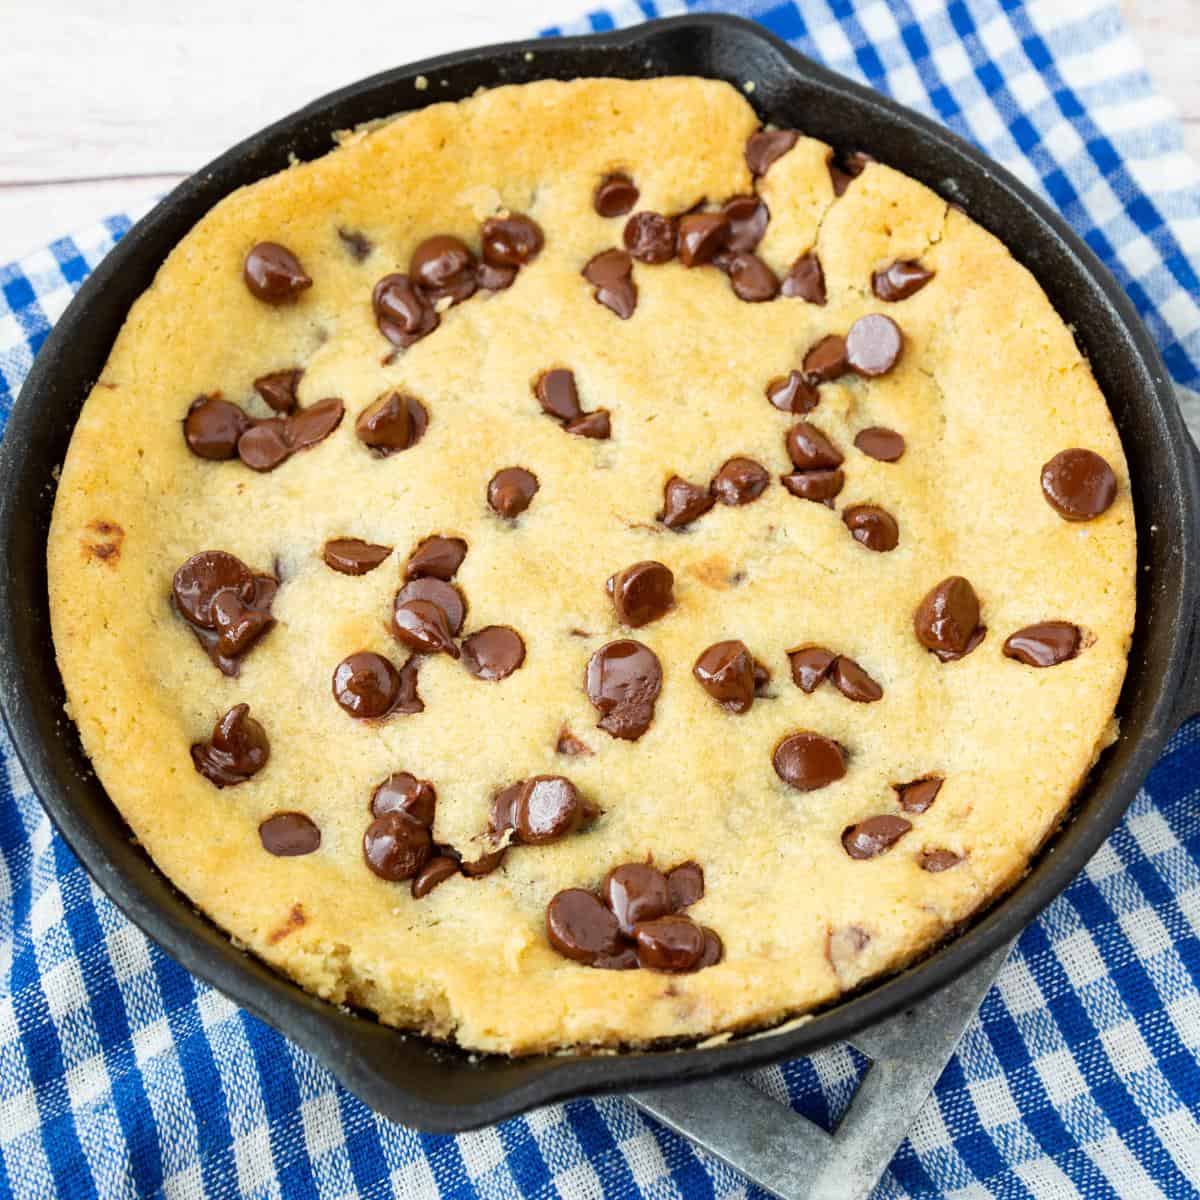 A skillet with fresh baked chocolate chip cookie.